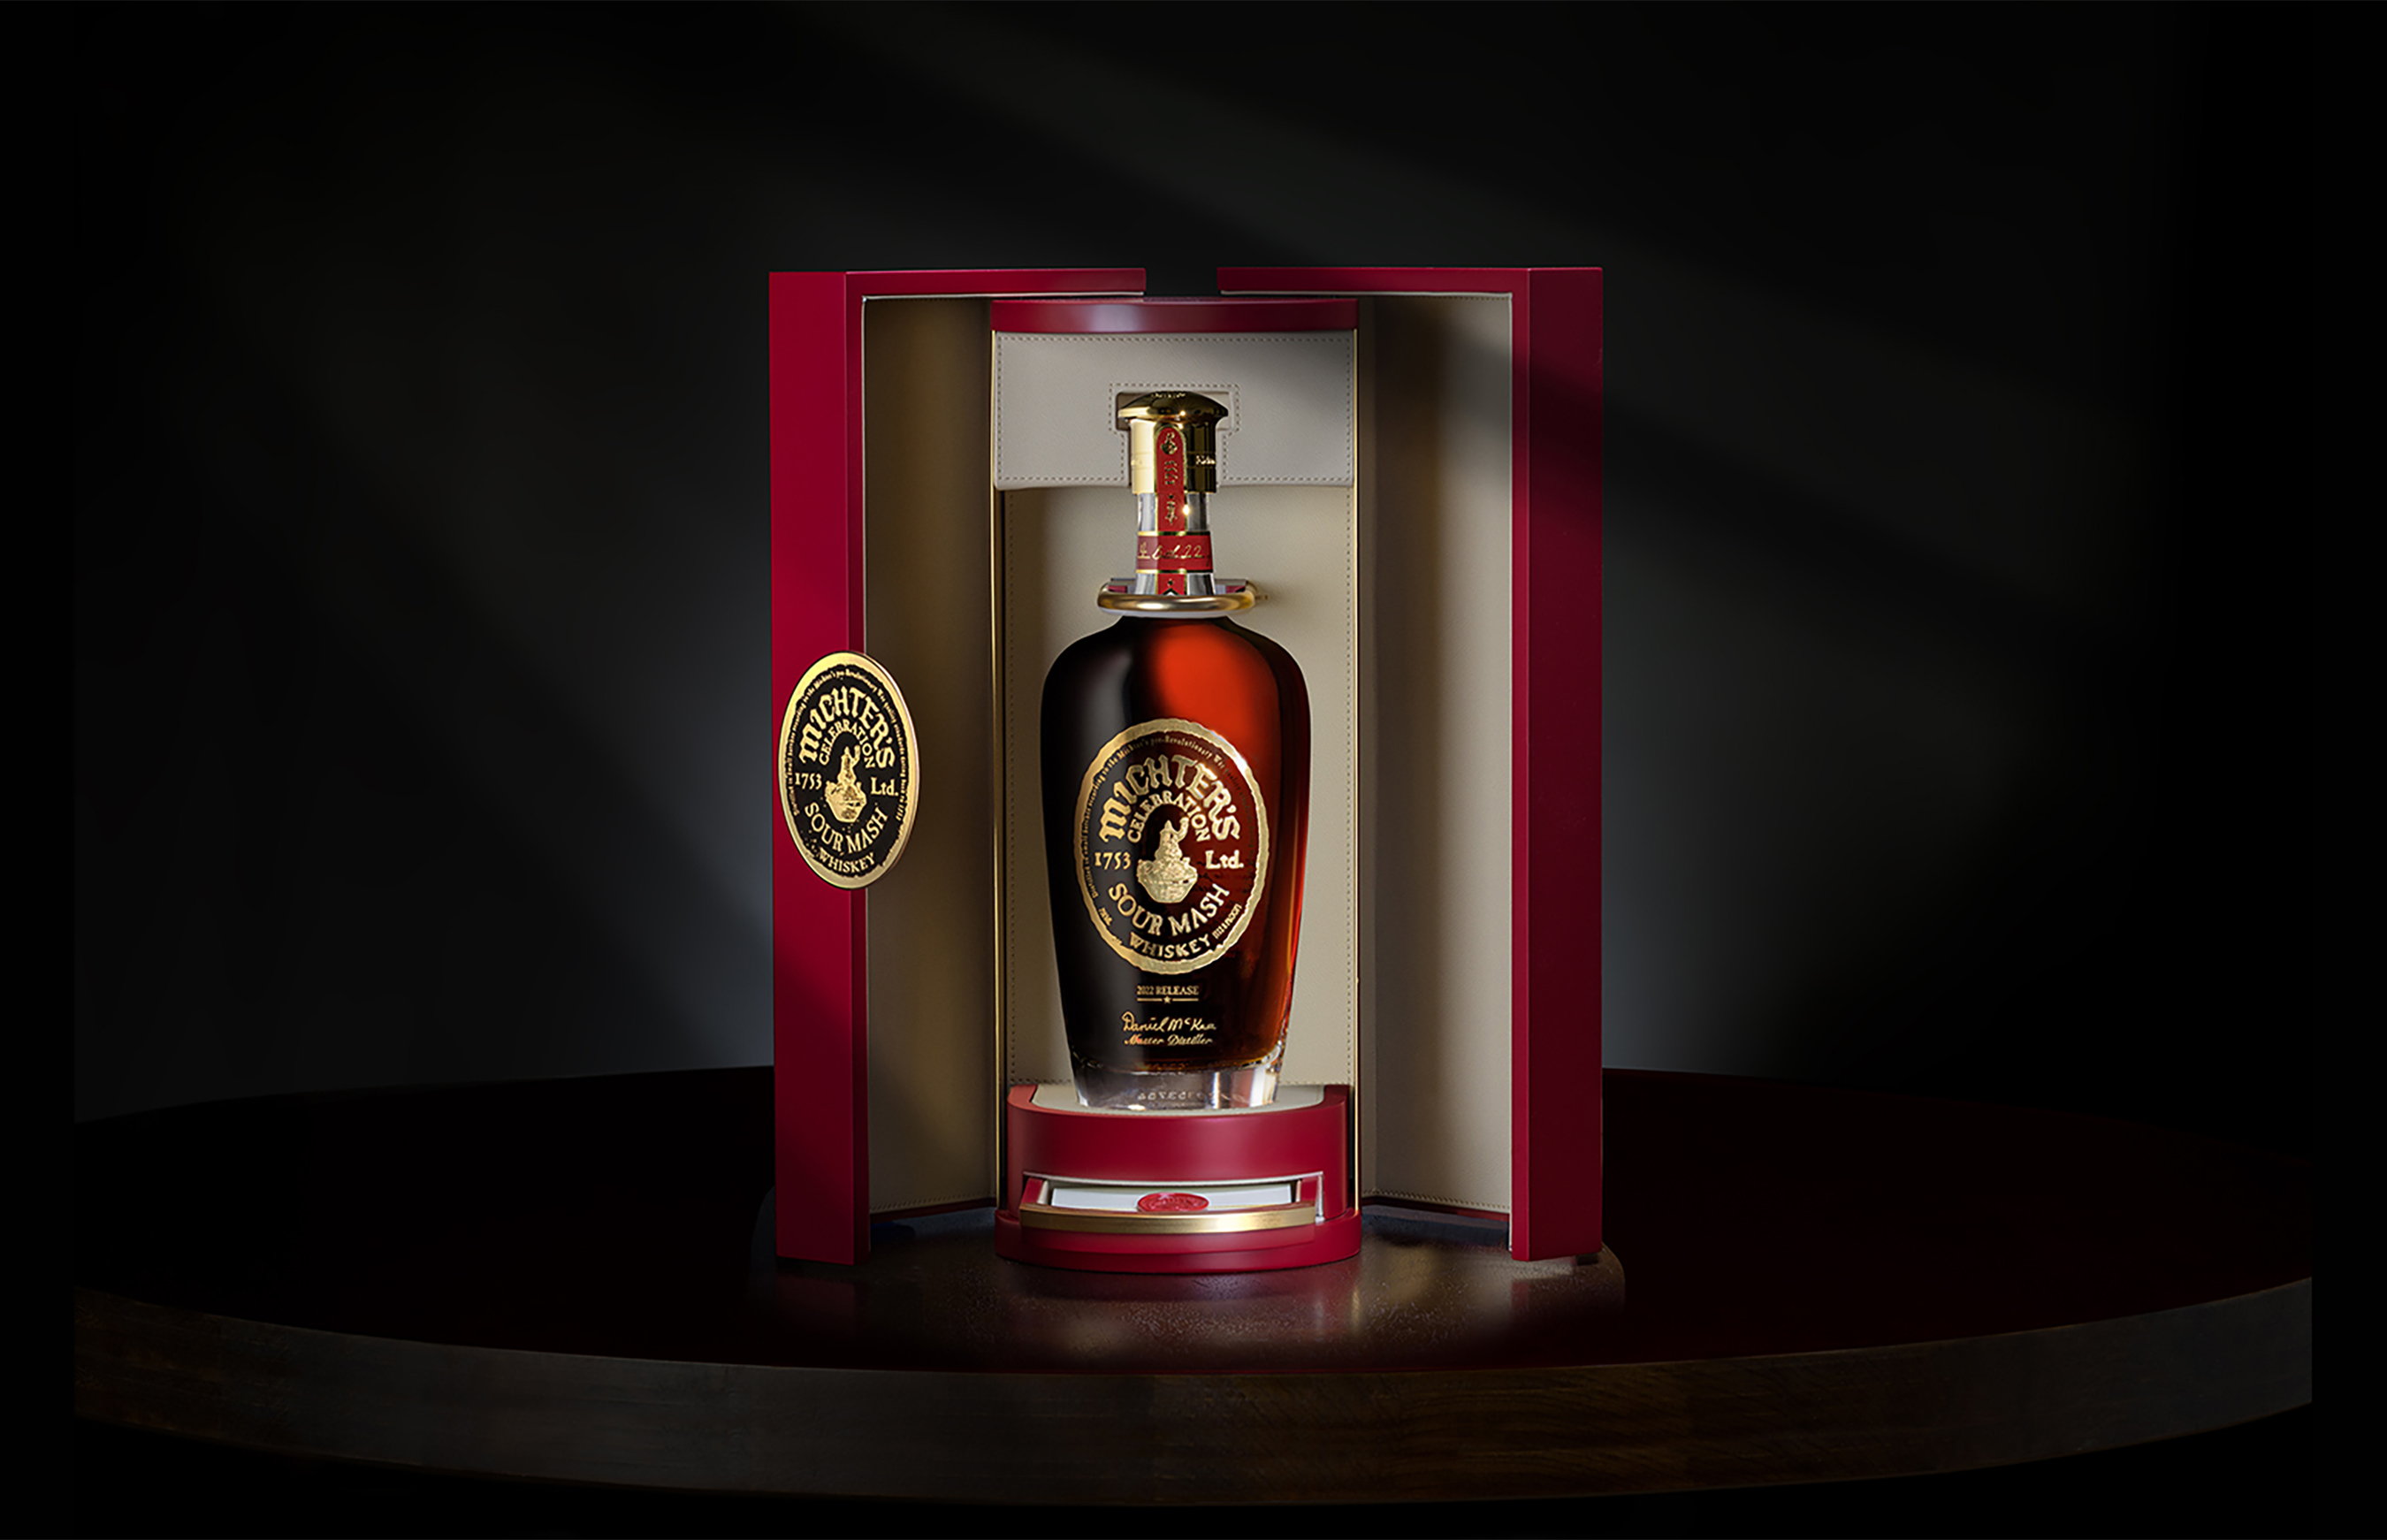 Each bottle of the 2022 Edition comes in a special gift box that has a drawer containing a letter signed by Michter's Master Distiller Dan McKee. "This is the second time that I have had the honor of working with our team to produce a Michter's Celebration release," remarked McKee. "This edition contains whiskeys personally selected by me from seven extraordinary barrels: three of them Kentucky straight bourbon and four of them Kentucky straight rye."